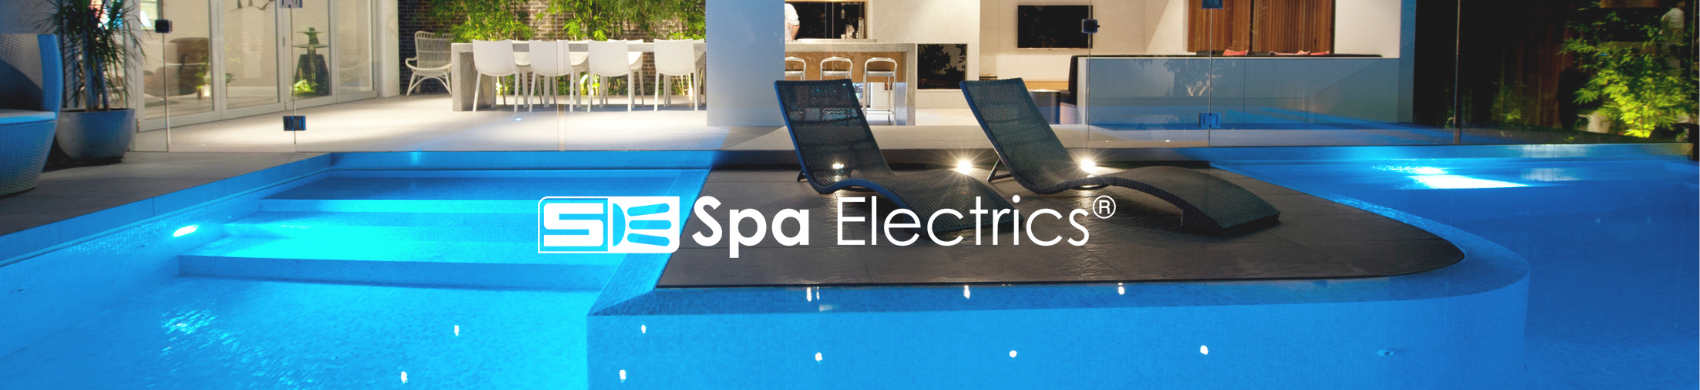 Light Up Your Swimming Pool This Winter With Spa Electrics - Vita Filters